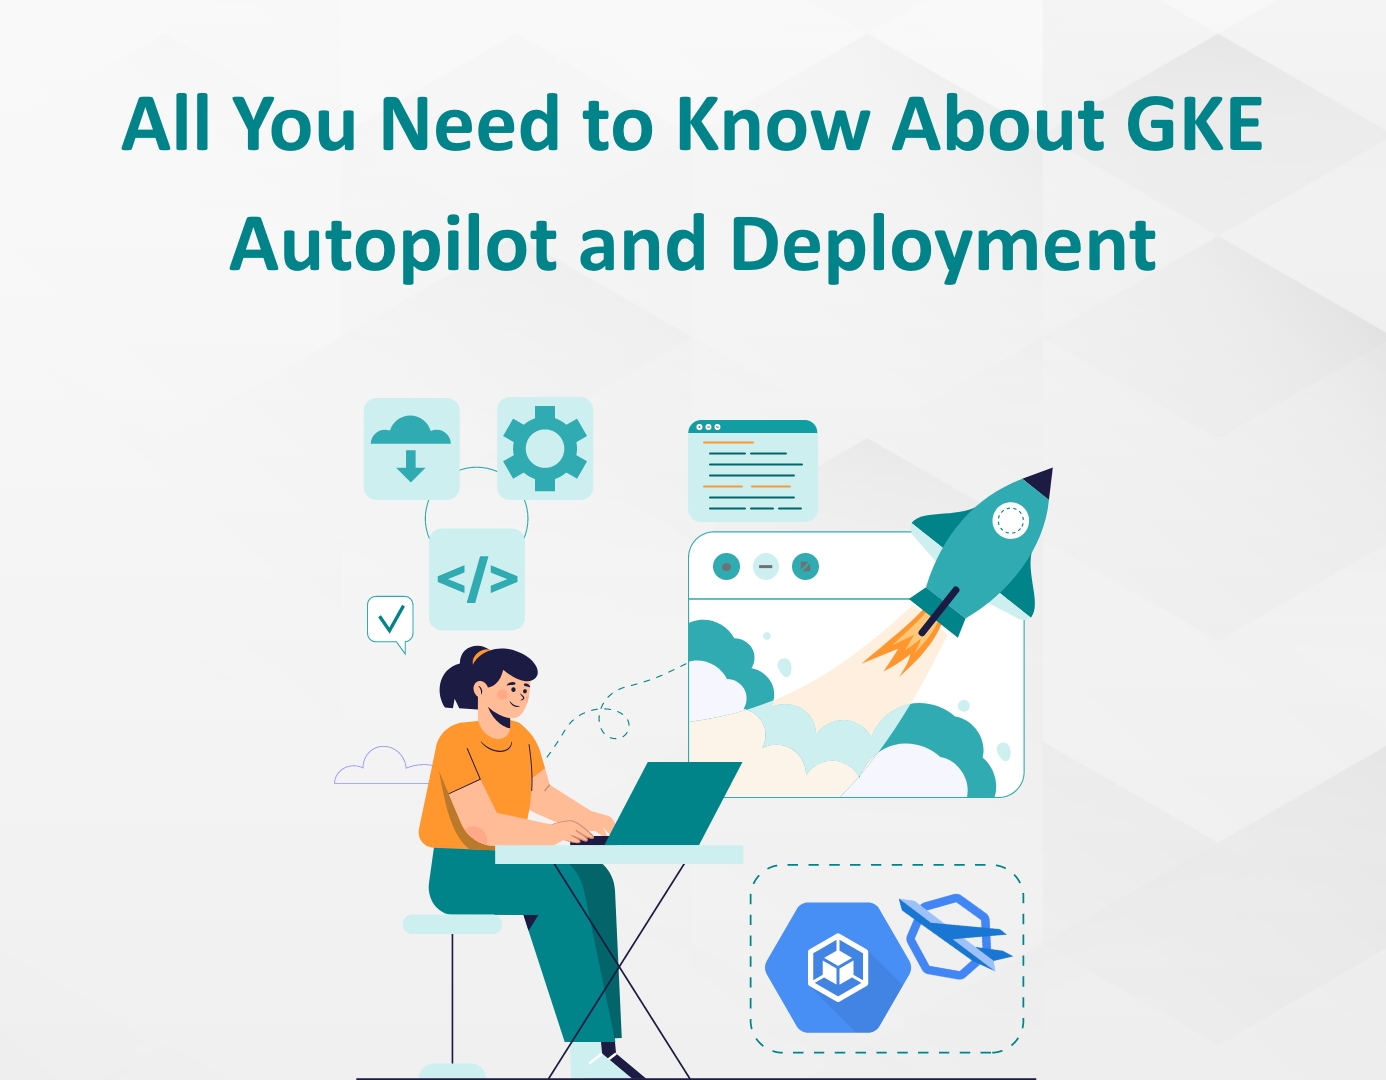 All You Need to Know About GKE Autopilot and Deployment